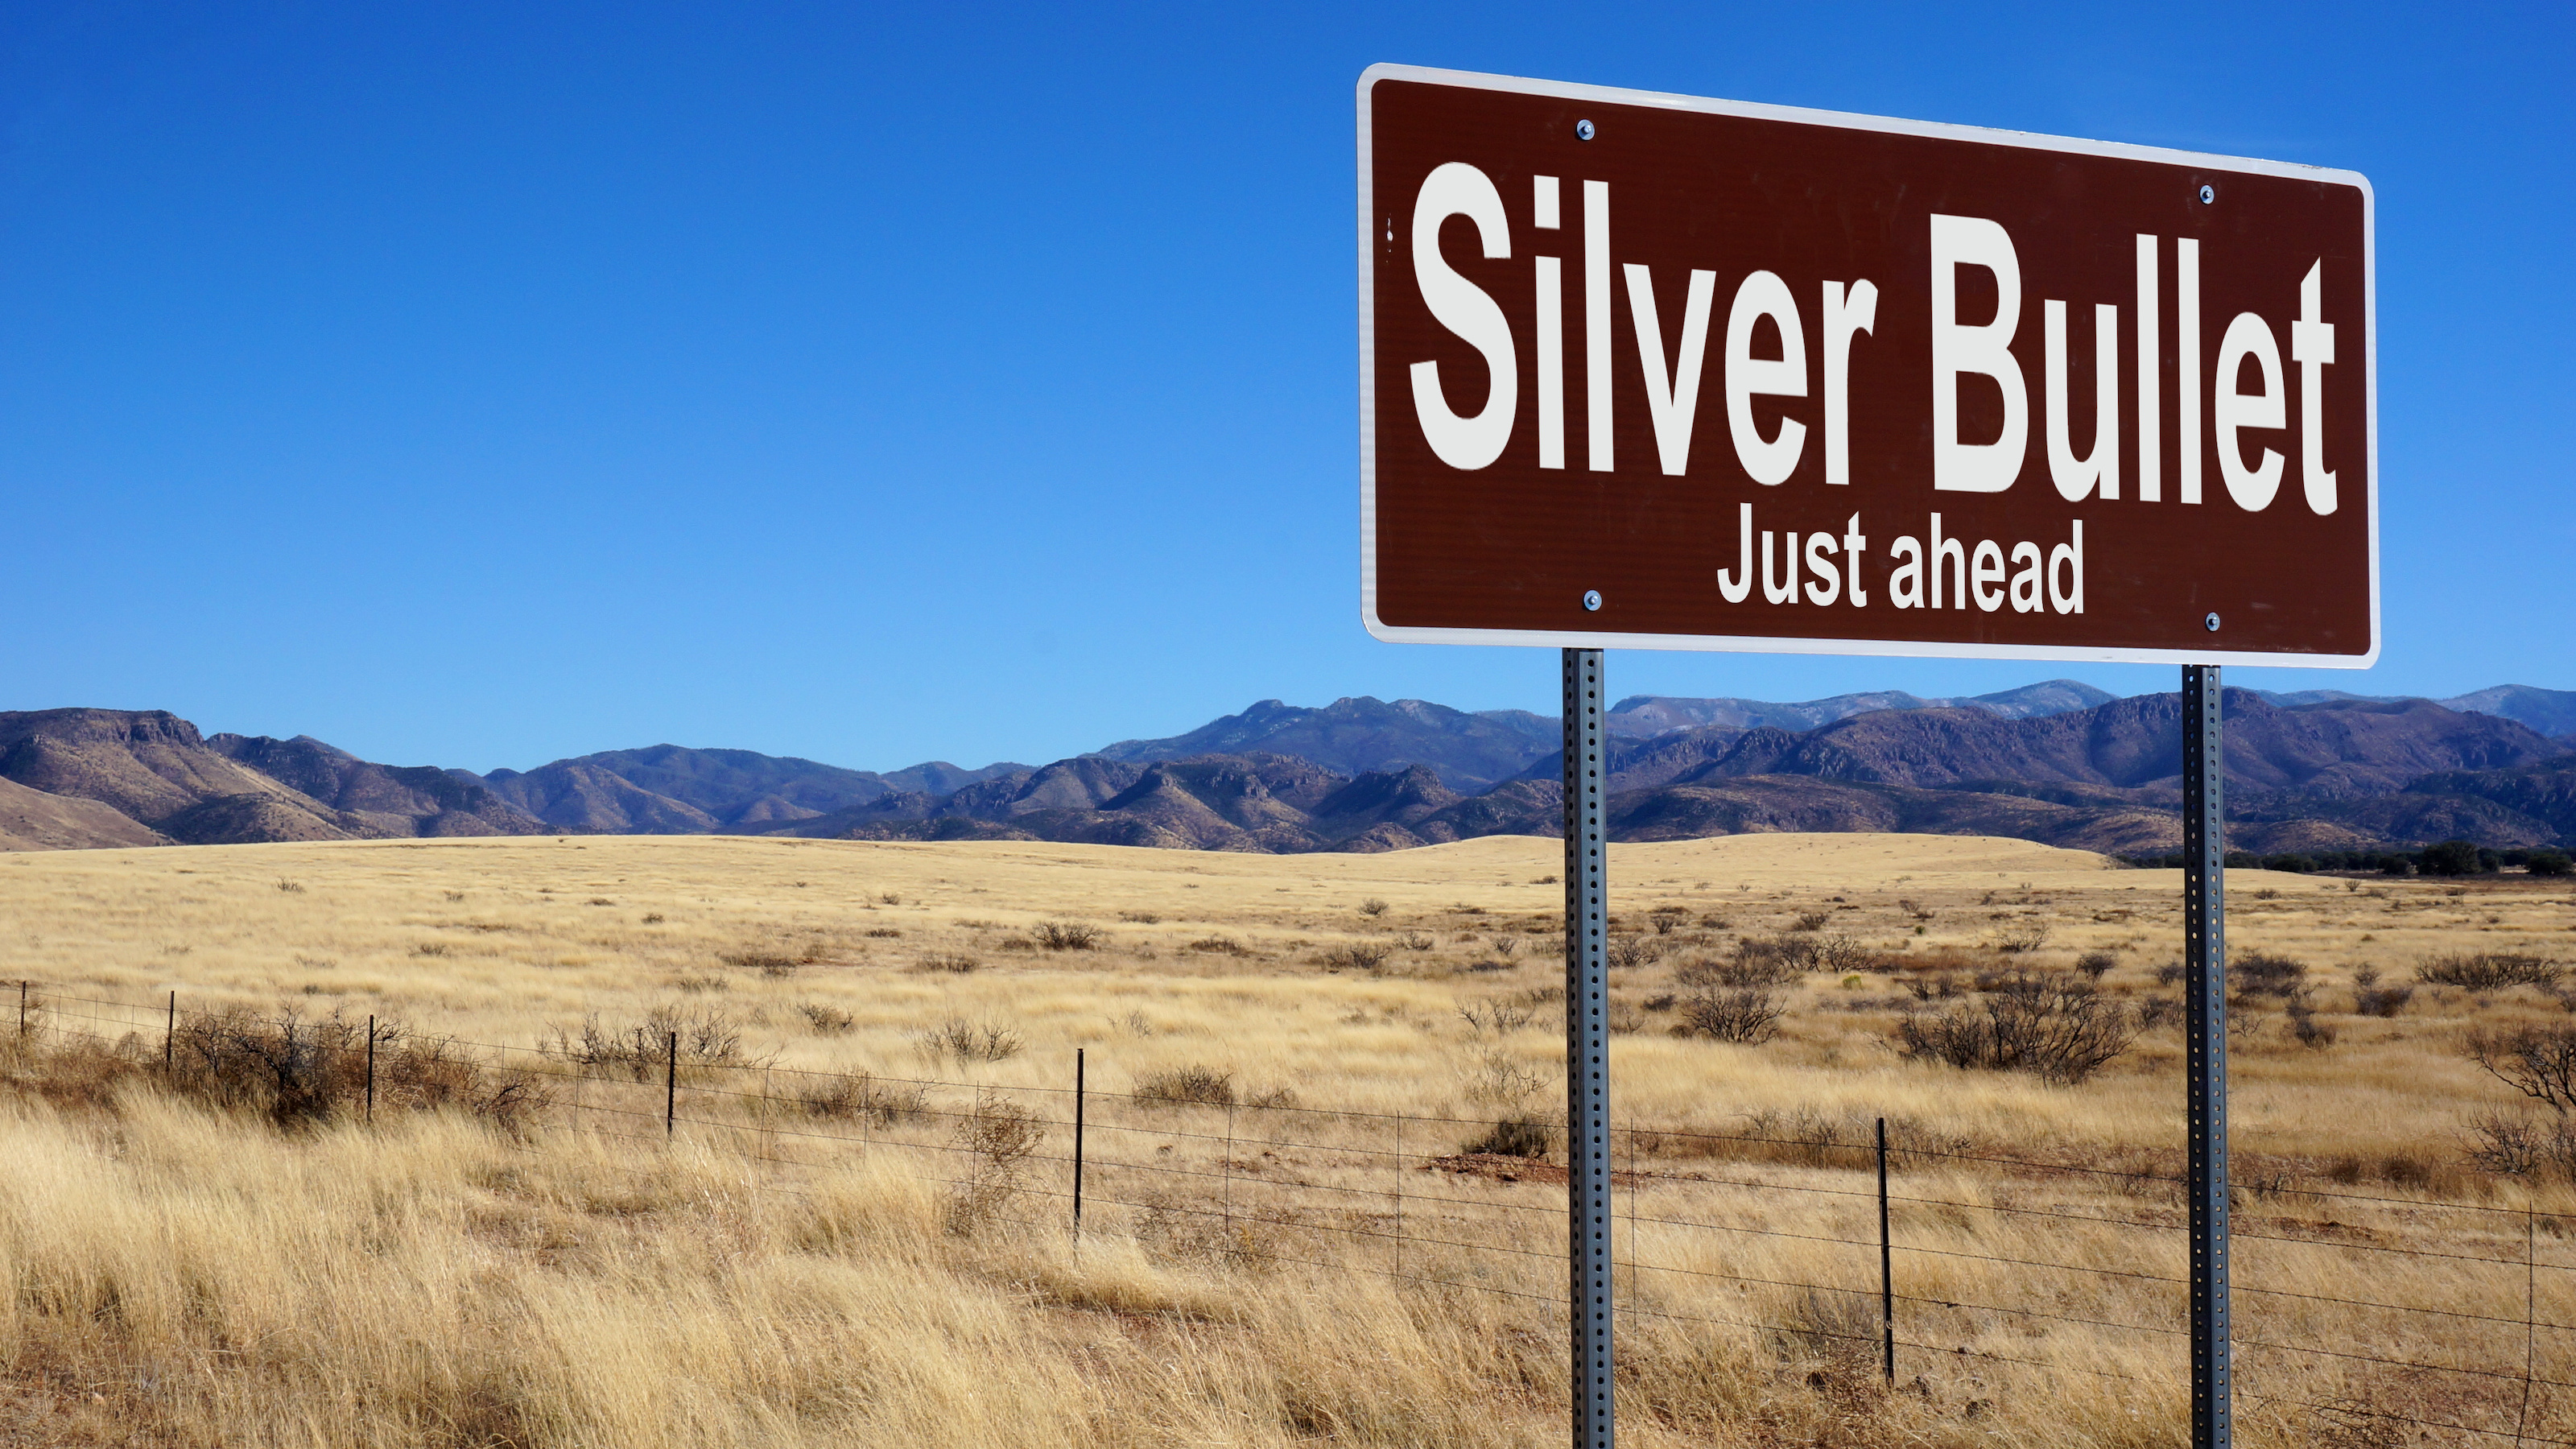 A brown road sign reads "Silver Bullet Just ahead" against a backdrop of dry grassy plains and distant mountains under a clear blue sky.